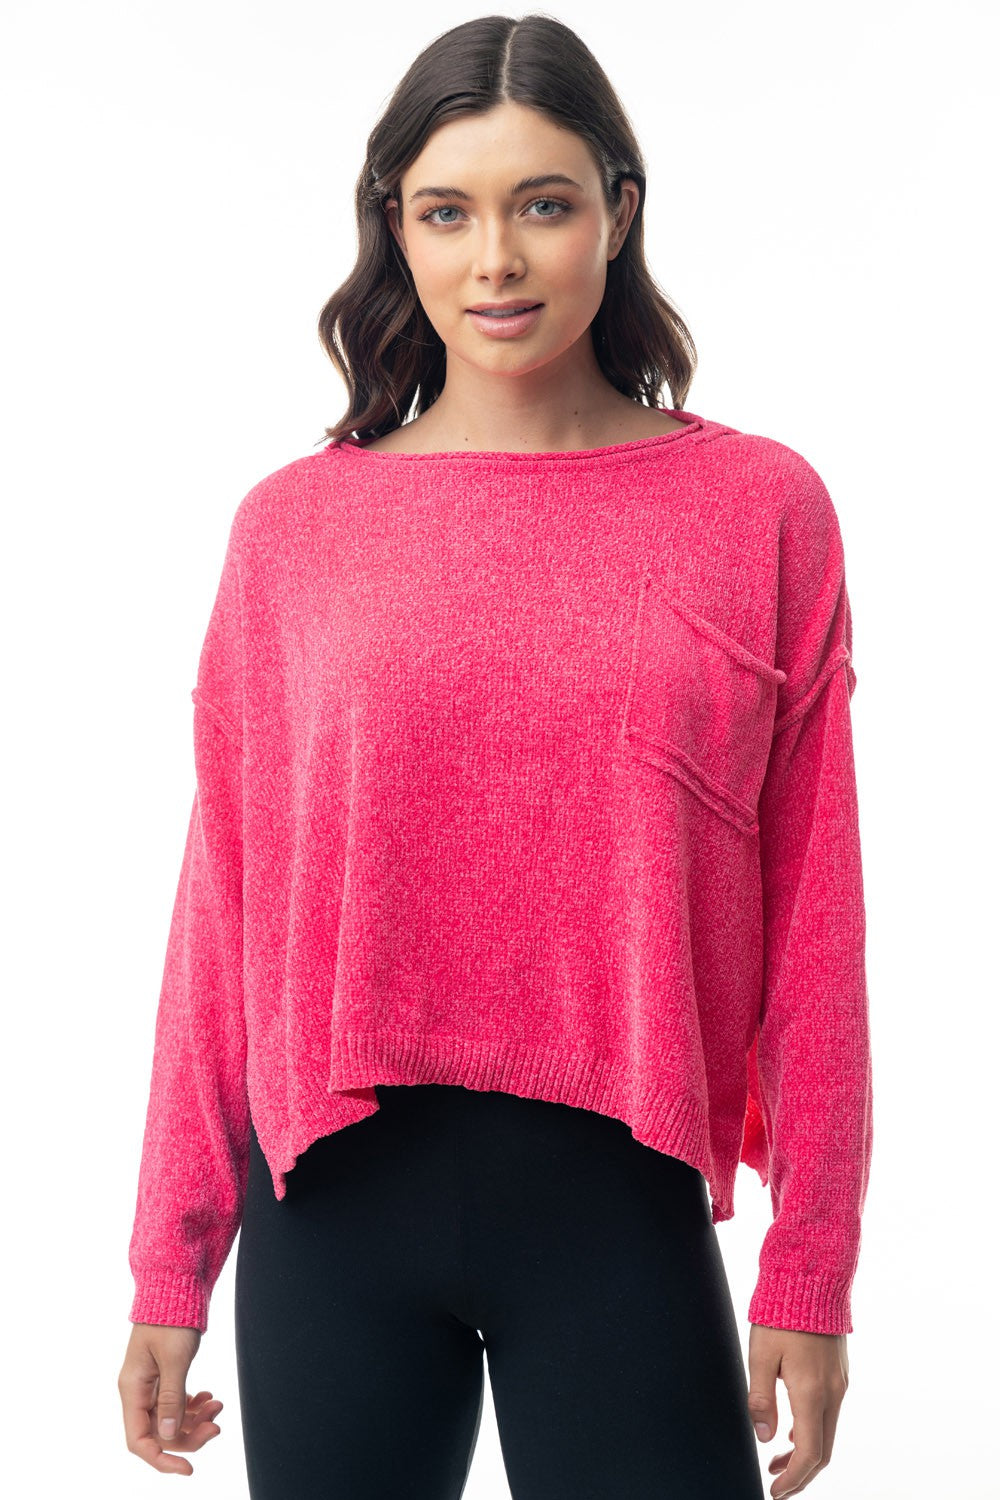 White Birch Knit Sweater Top in Hot Pink